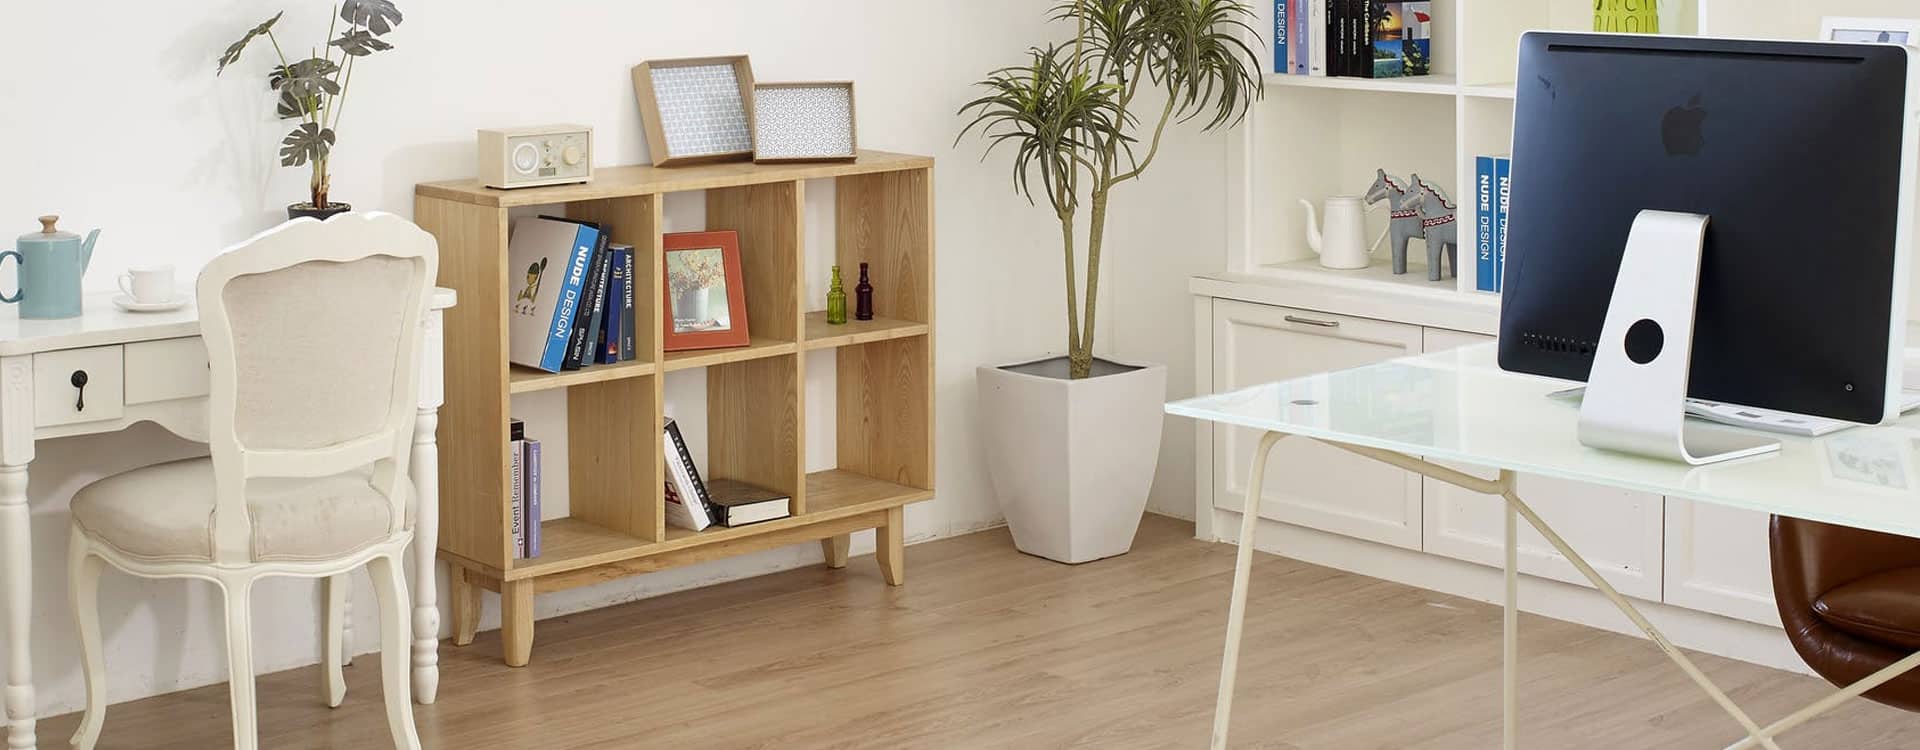 5 Reasons To Get Vinyl Plank Flooring For Your Home - Flooring Experts in Brisbane, QLD